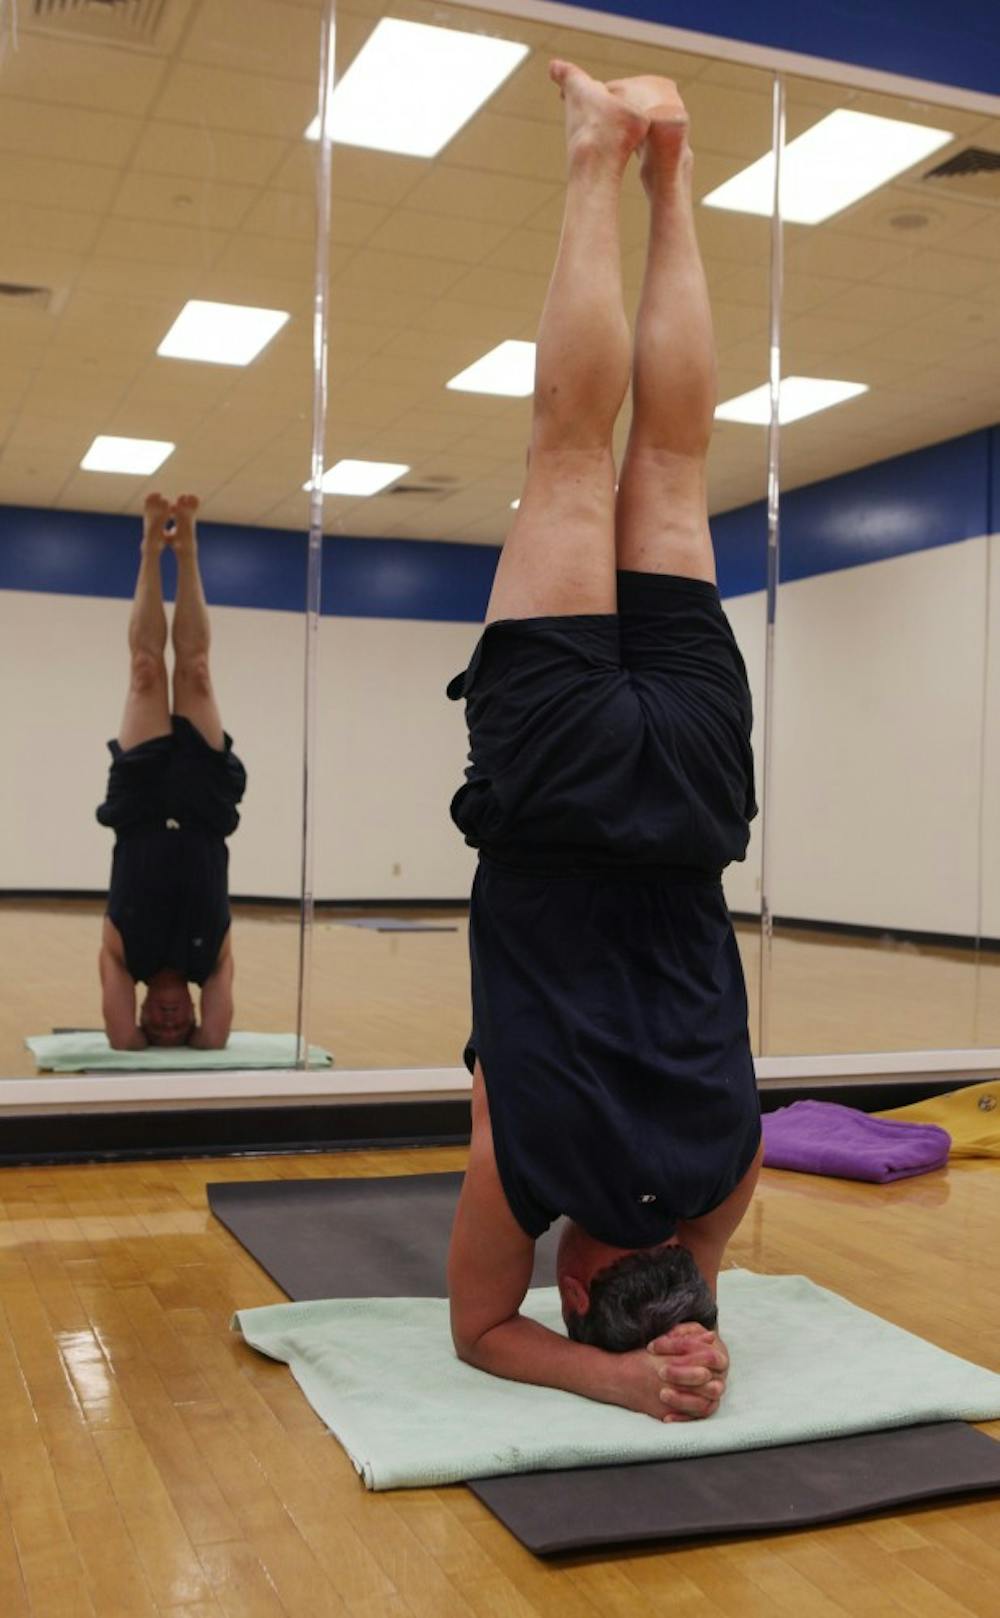 Duke yoga instructor John Orr may have the most interesting backstory you've never heard of.